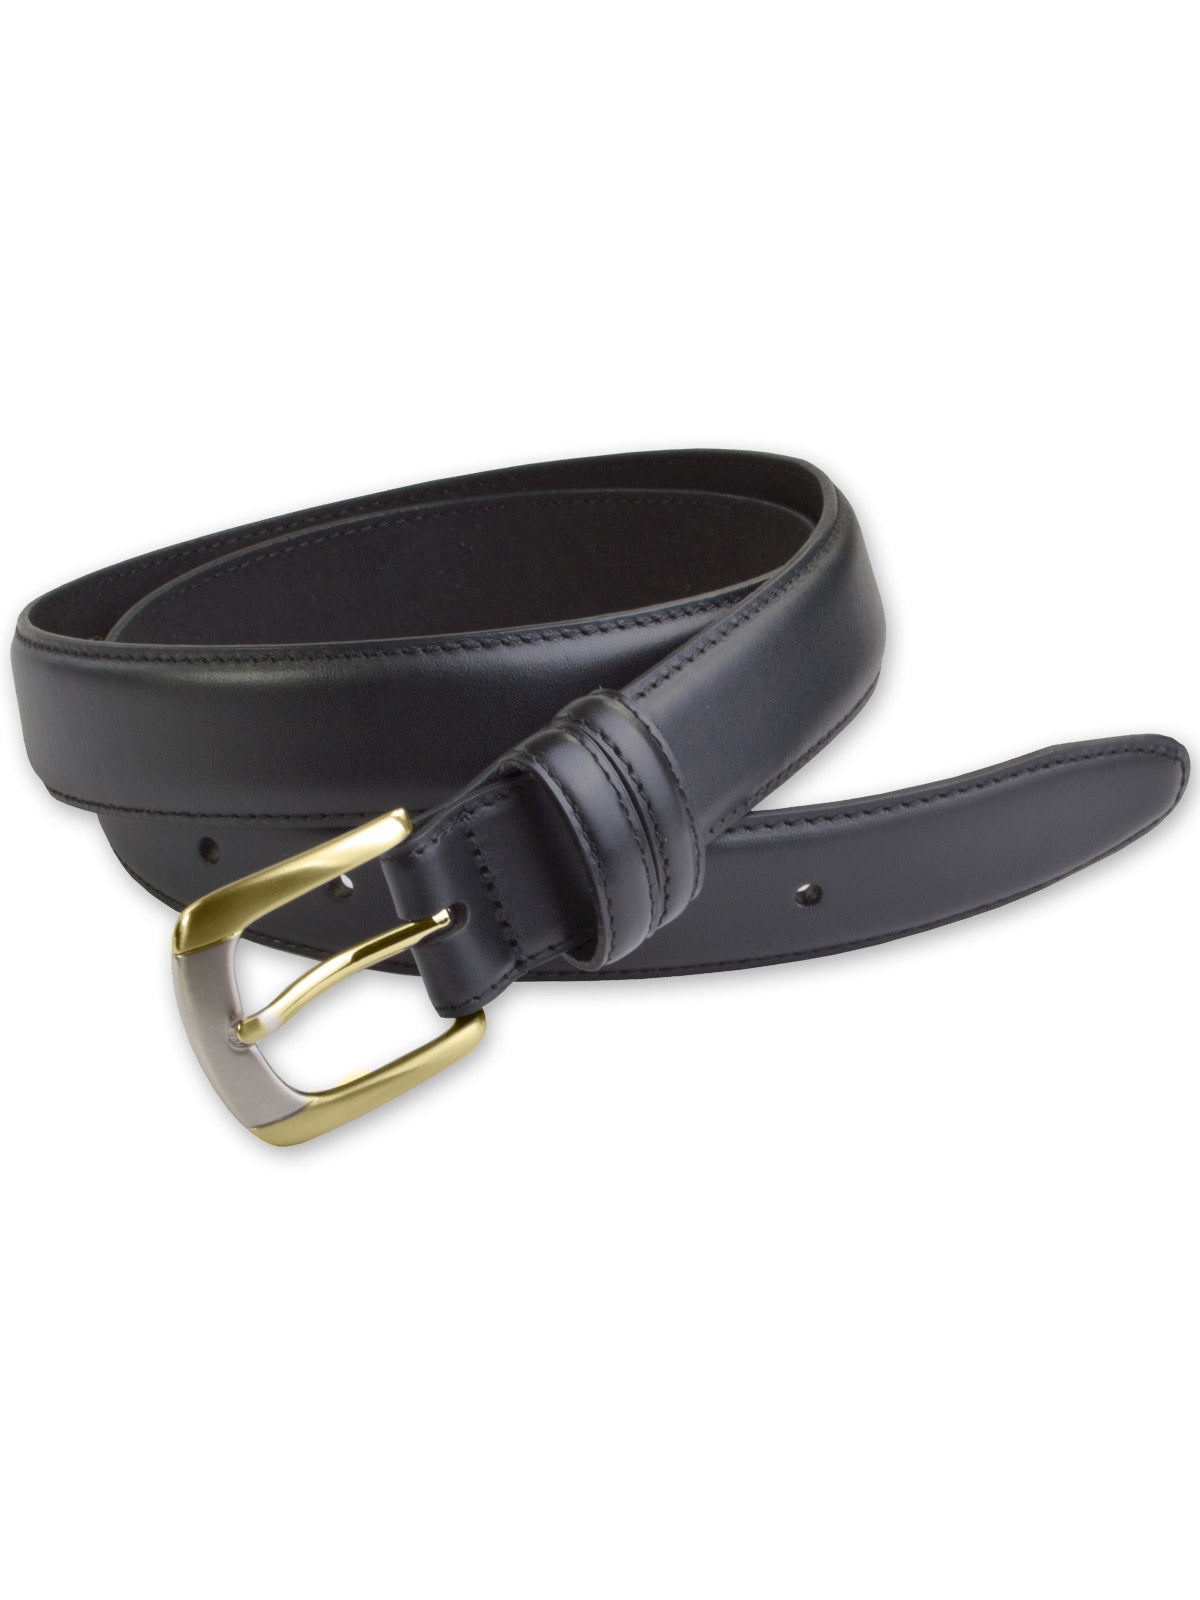 Marc Wolf Leather Dress Belts - Two Tone Buckle (56 - 66)